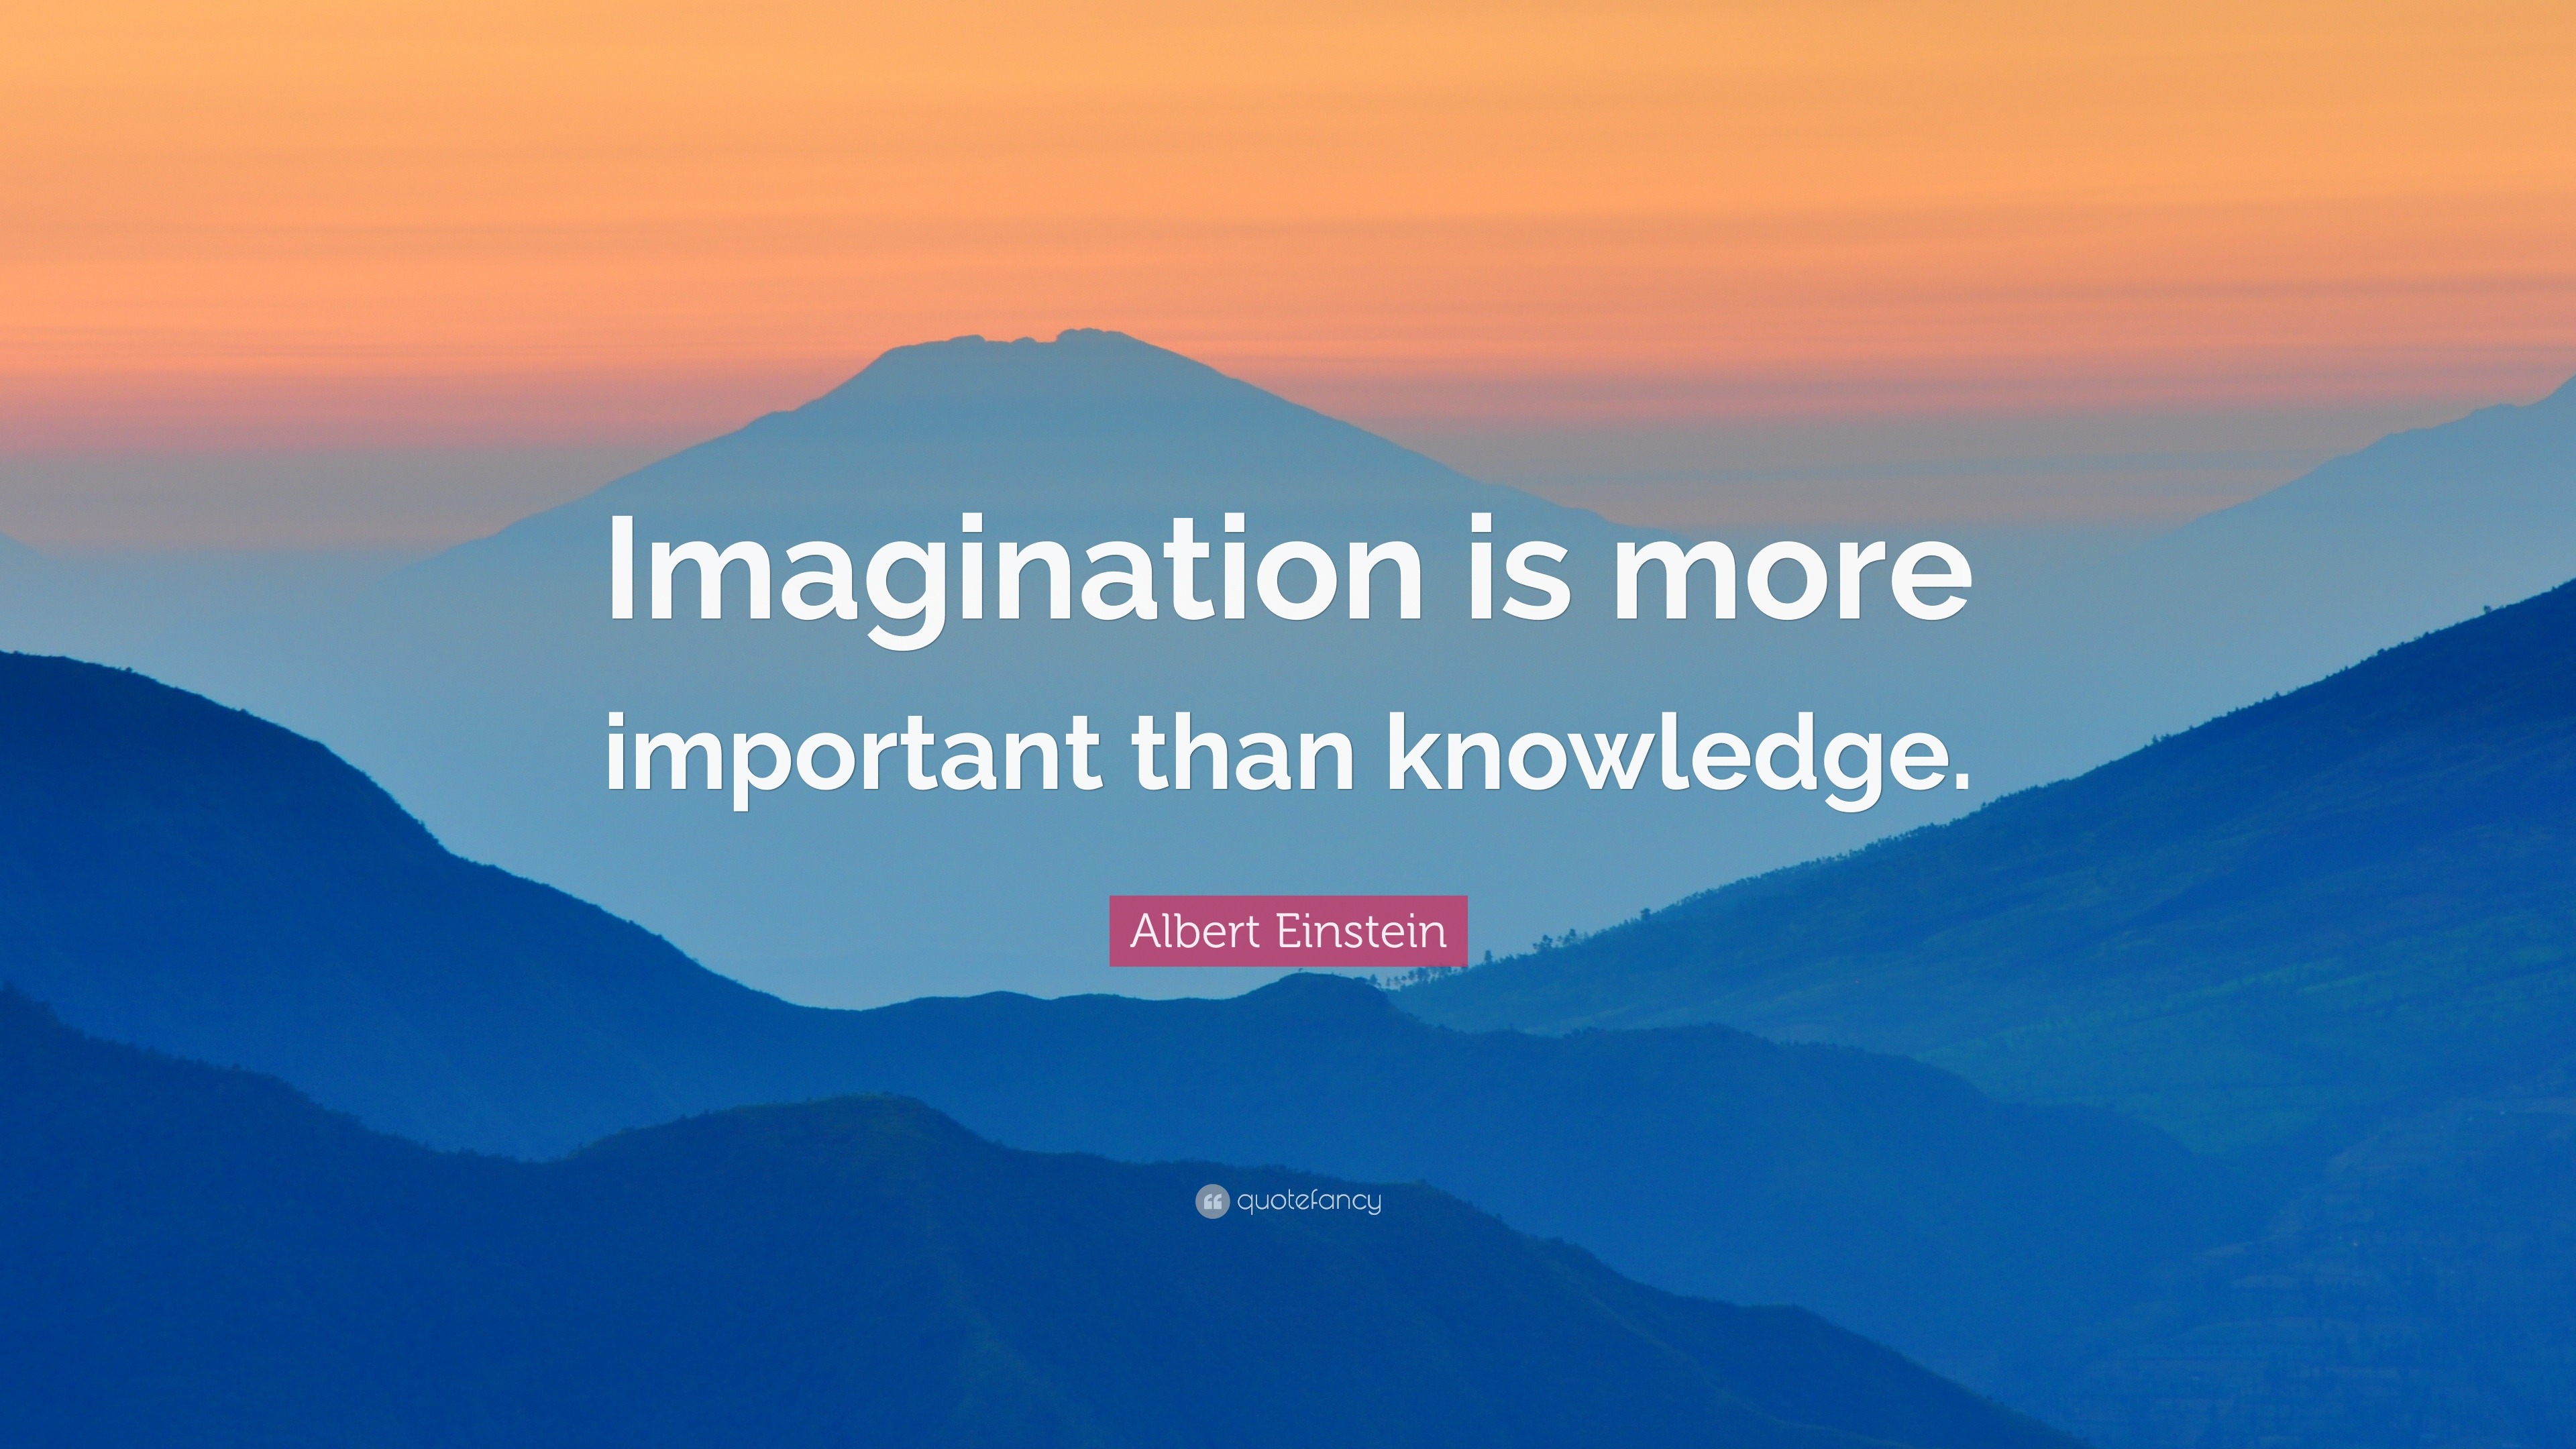 Albert Einstein Quote: “Imagination is more important than knowledge